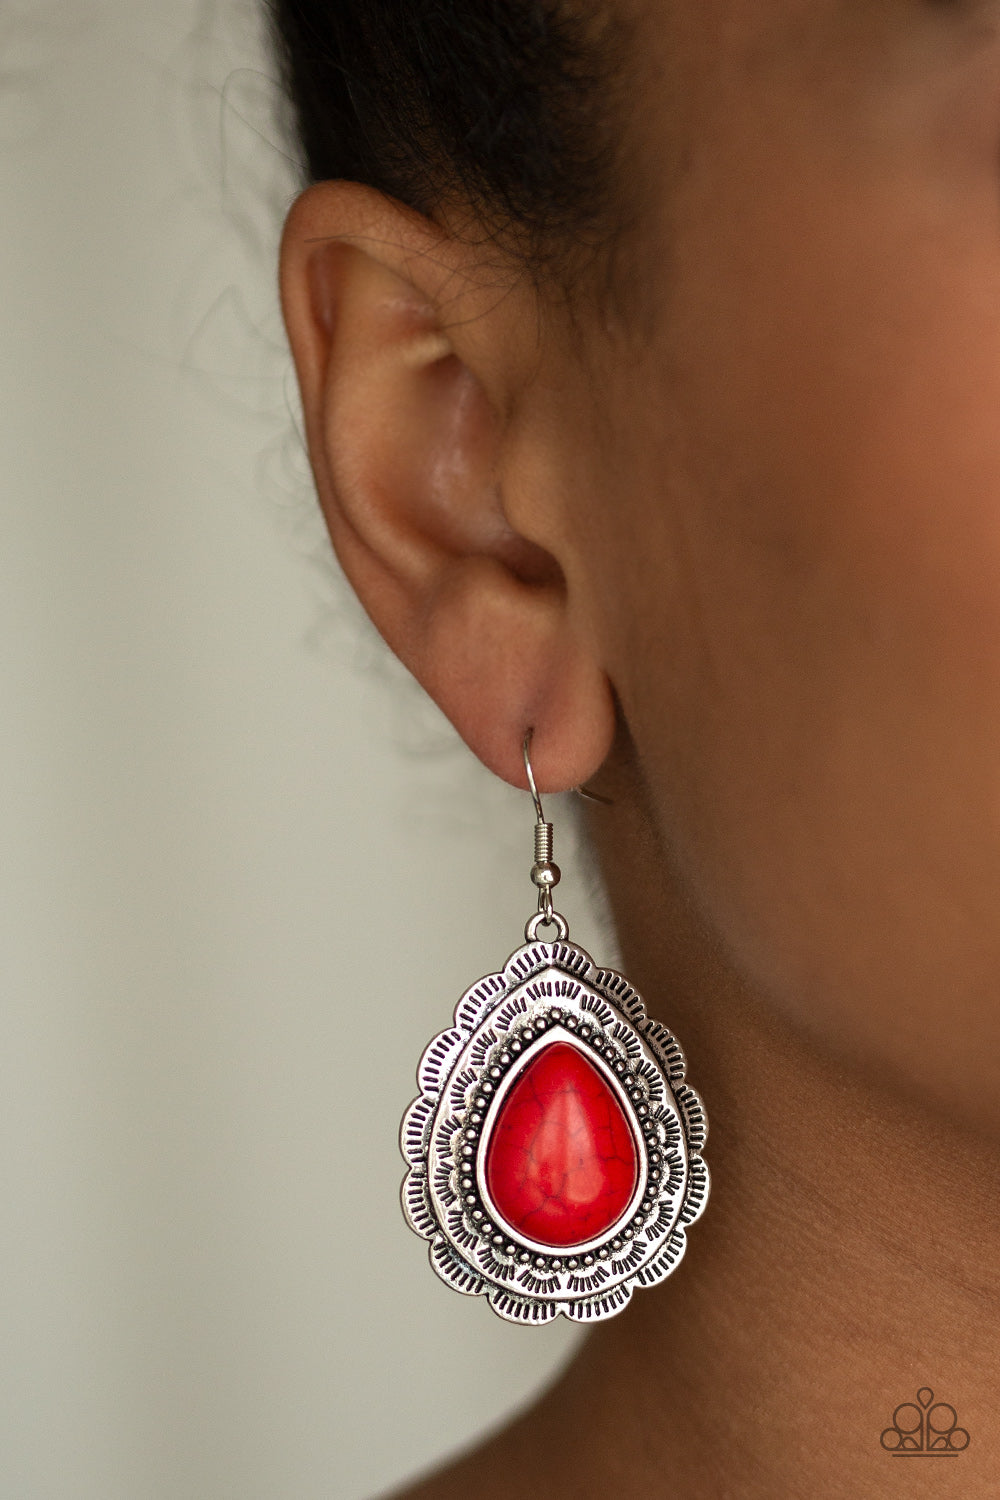 Paparazzi Accessories - Mountain Mover - Red Earrings